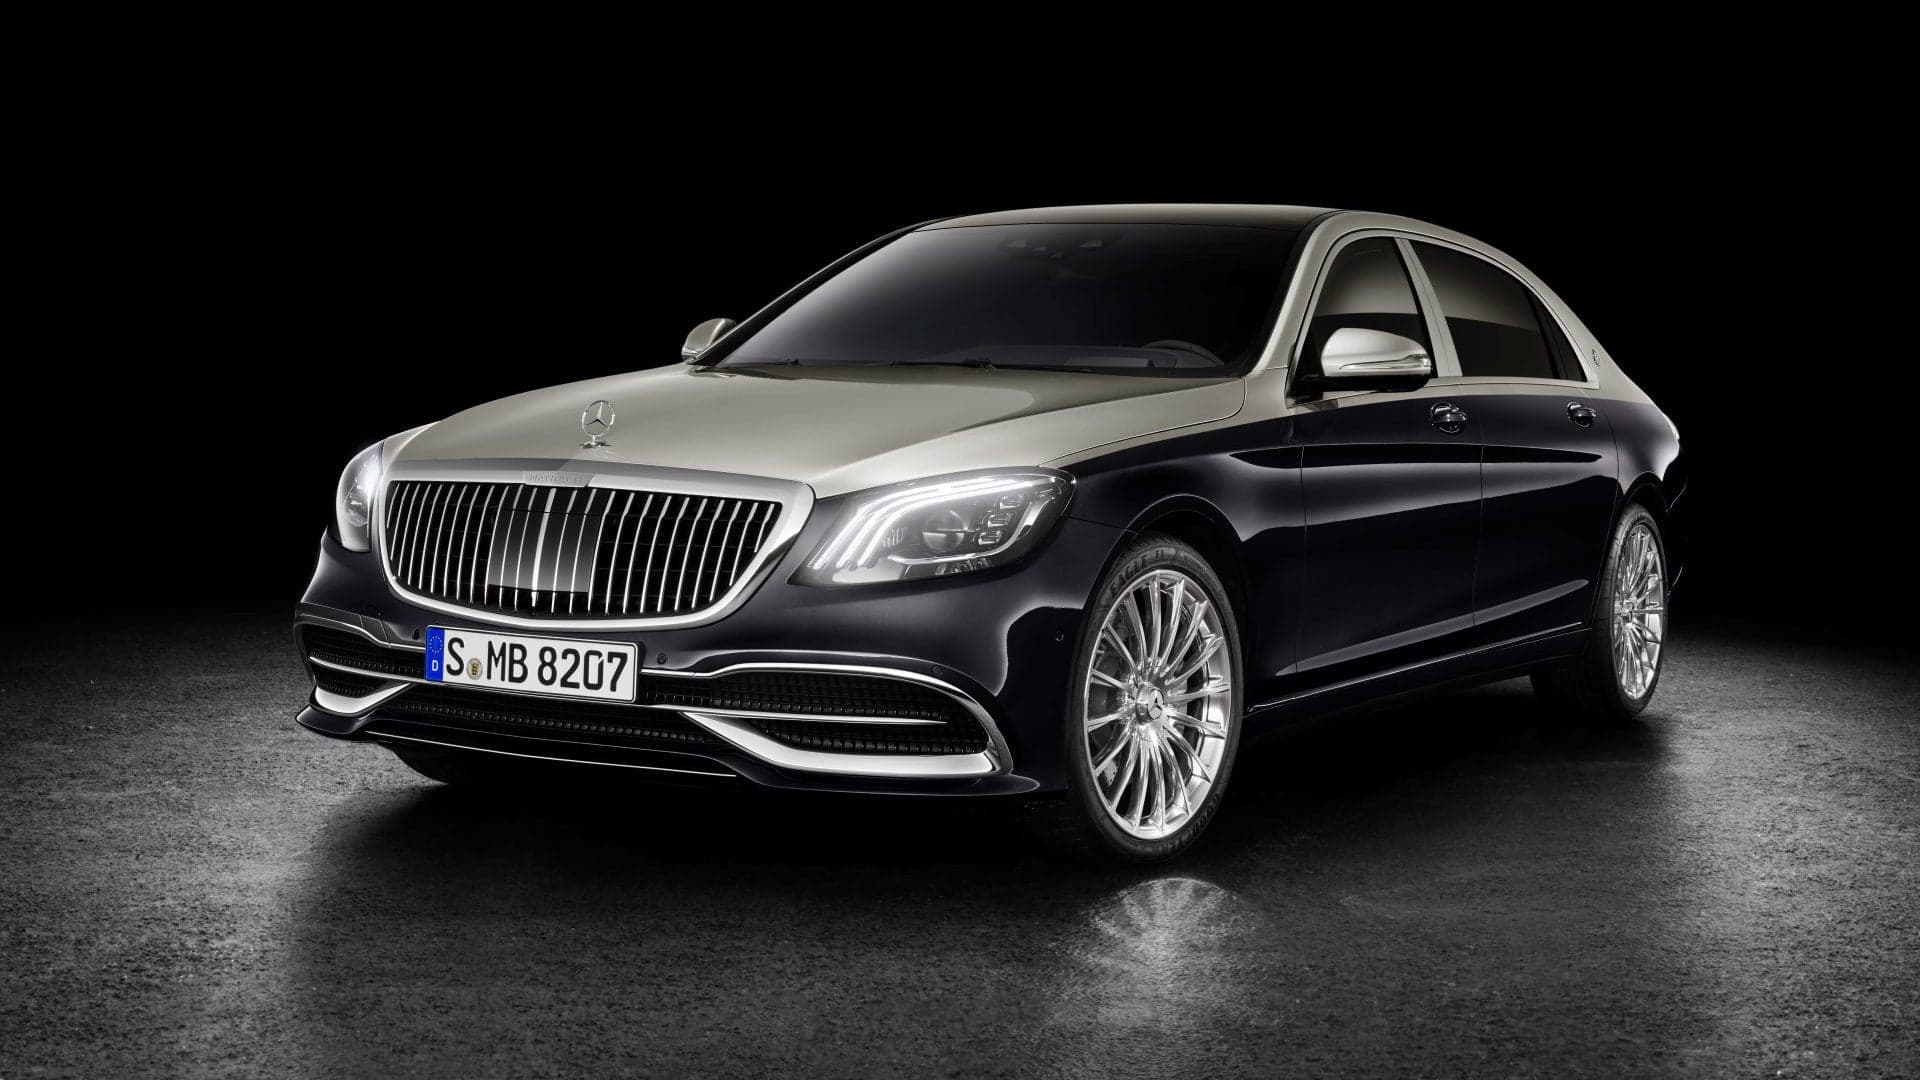 The Mercedes-Maybach S-Class Gets a Pinstriped Grille and Two-Tone Paint